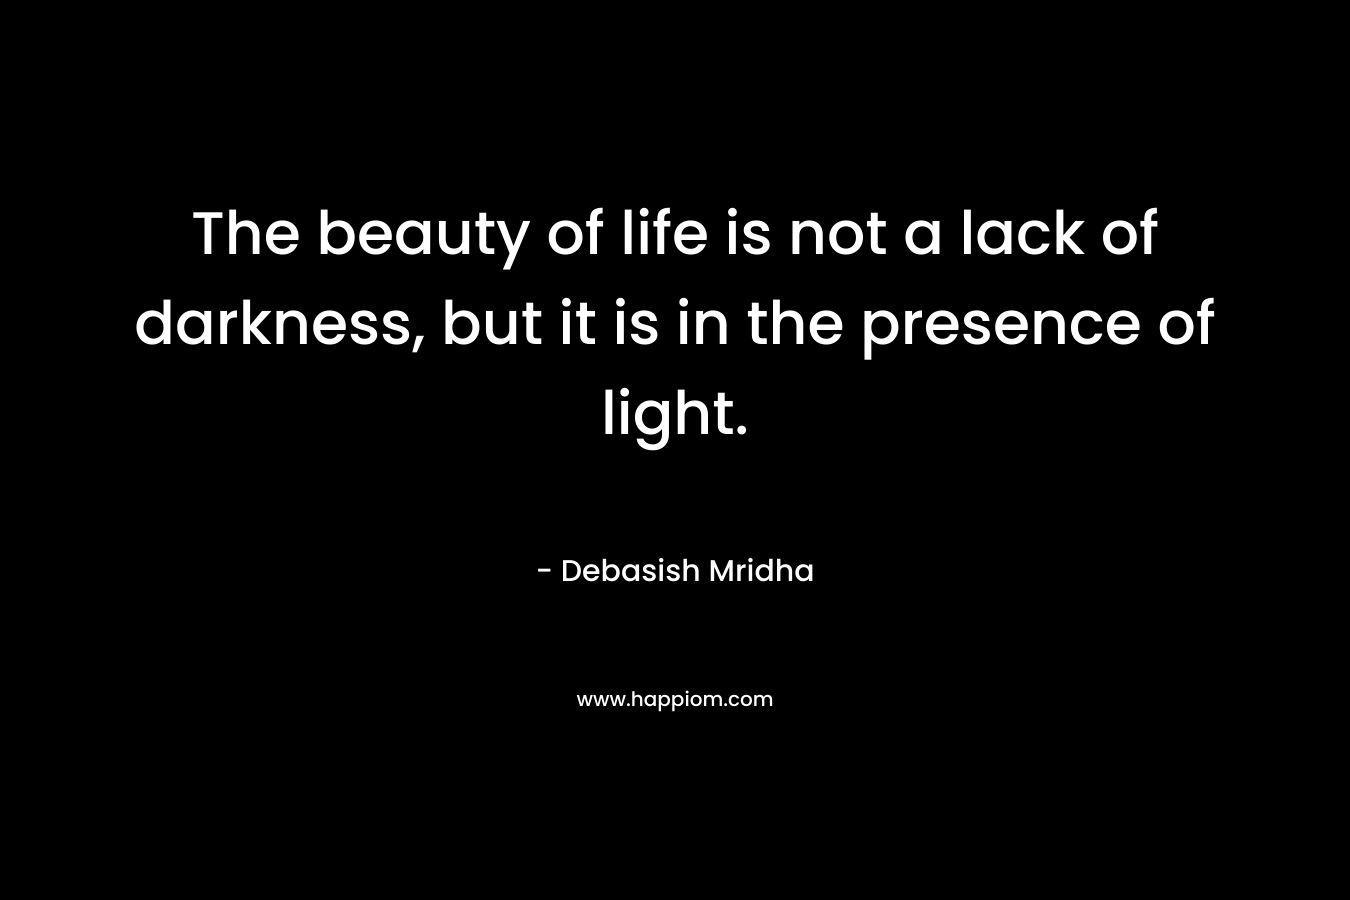 The beauty of life is not a lack of darkness, but it is in the presence of light.